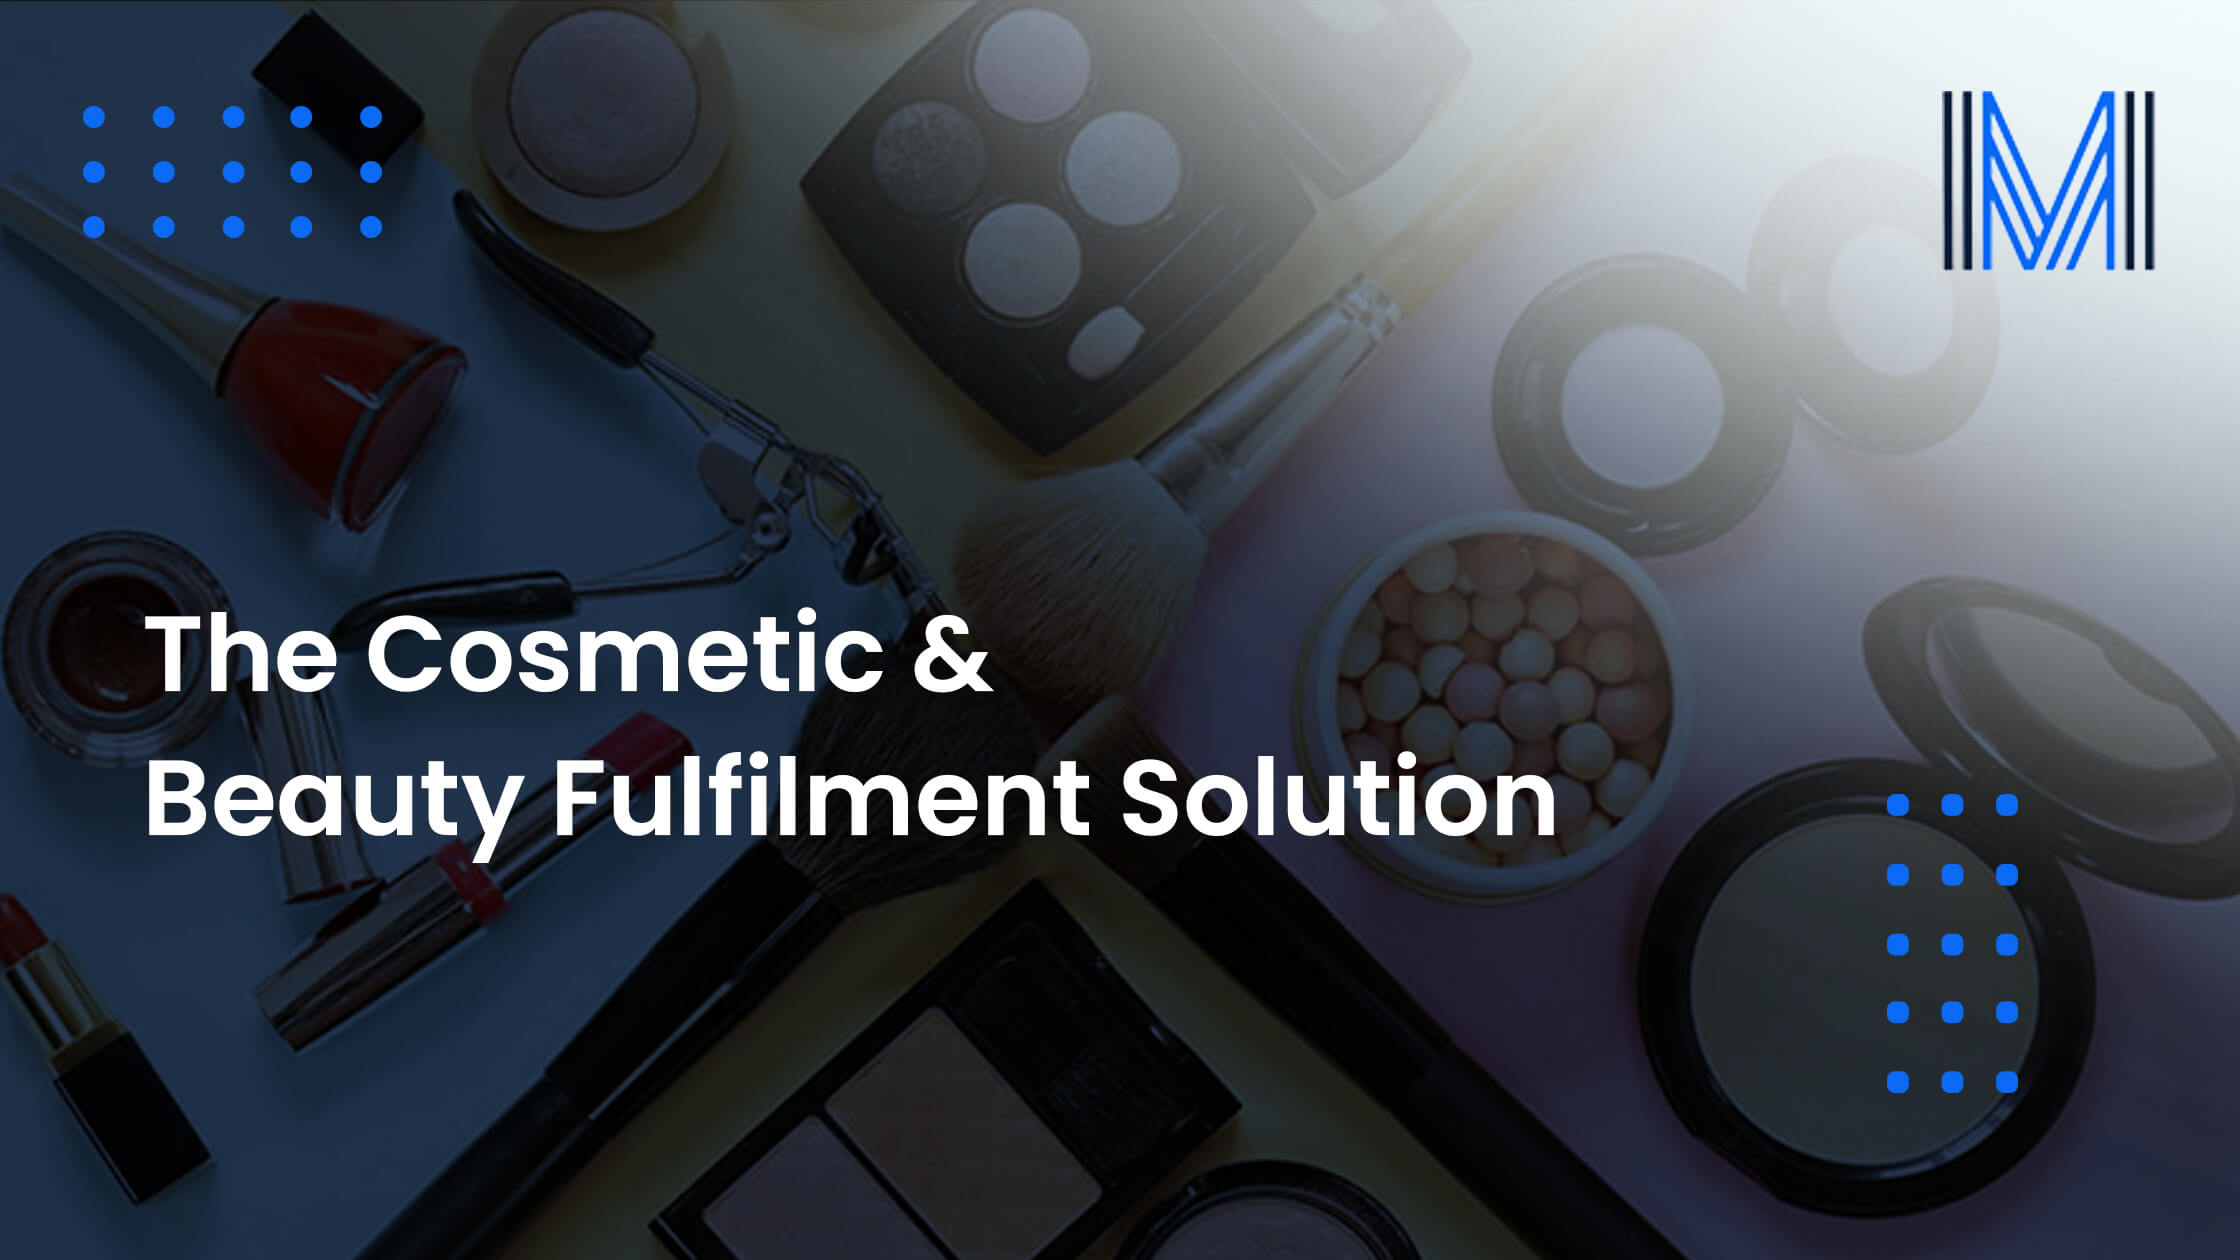 The Cosmetic & Beauty Cosmetics Fulfilment Solution